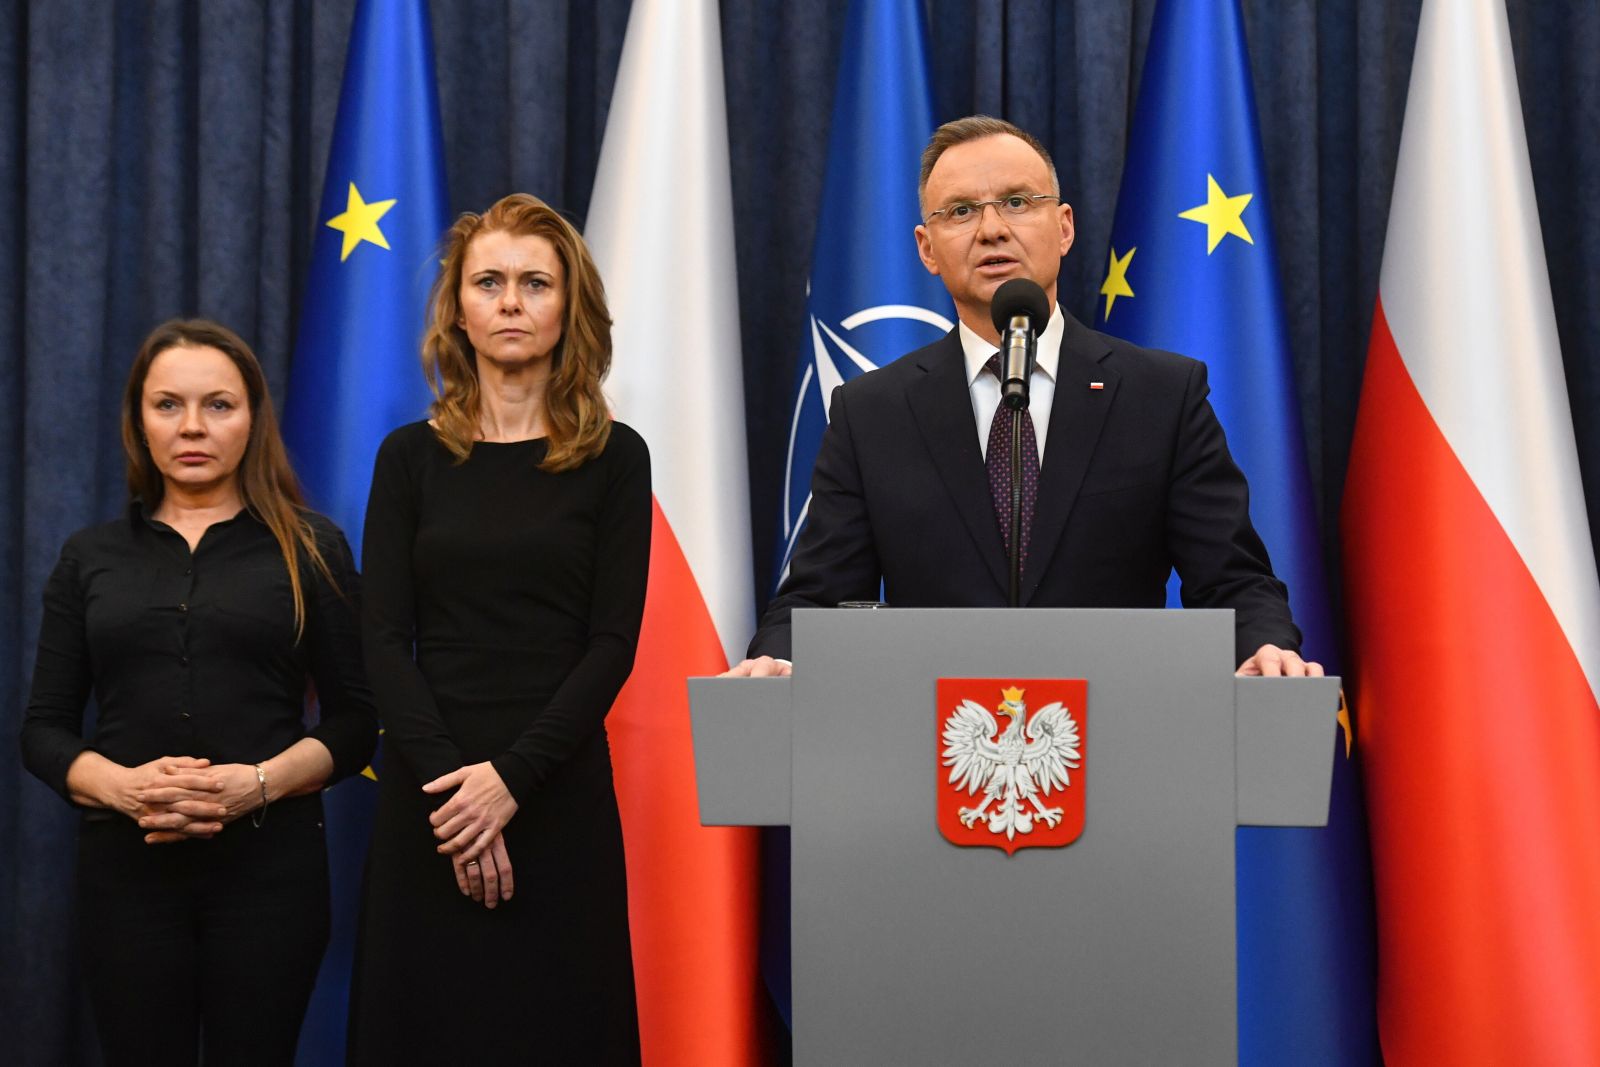 epa11099235 Polish President Andrzej Duda (R) speaks next to Mariusz Kaminski's wife Barbara Kaminska (L) and Maciej Wasik's wife Roma Wasik (C) during a statement at the Presidential Palace in Warsaw, Poland, 23 January 2024. Duda has pardoned the former interior minister, Mariusz Kaminski, and his deputy, Maciej Wasik, who were sentenced to two years in prison for abuse of power, and has requested that the justice minister release them immediately.  EPA/Piotr Nowak POLAND OUT